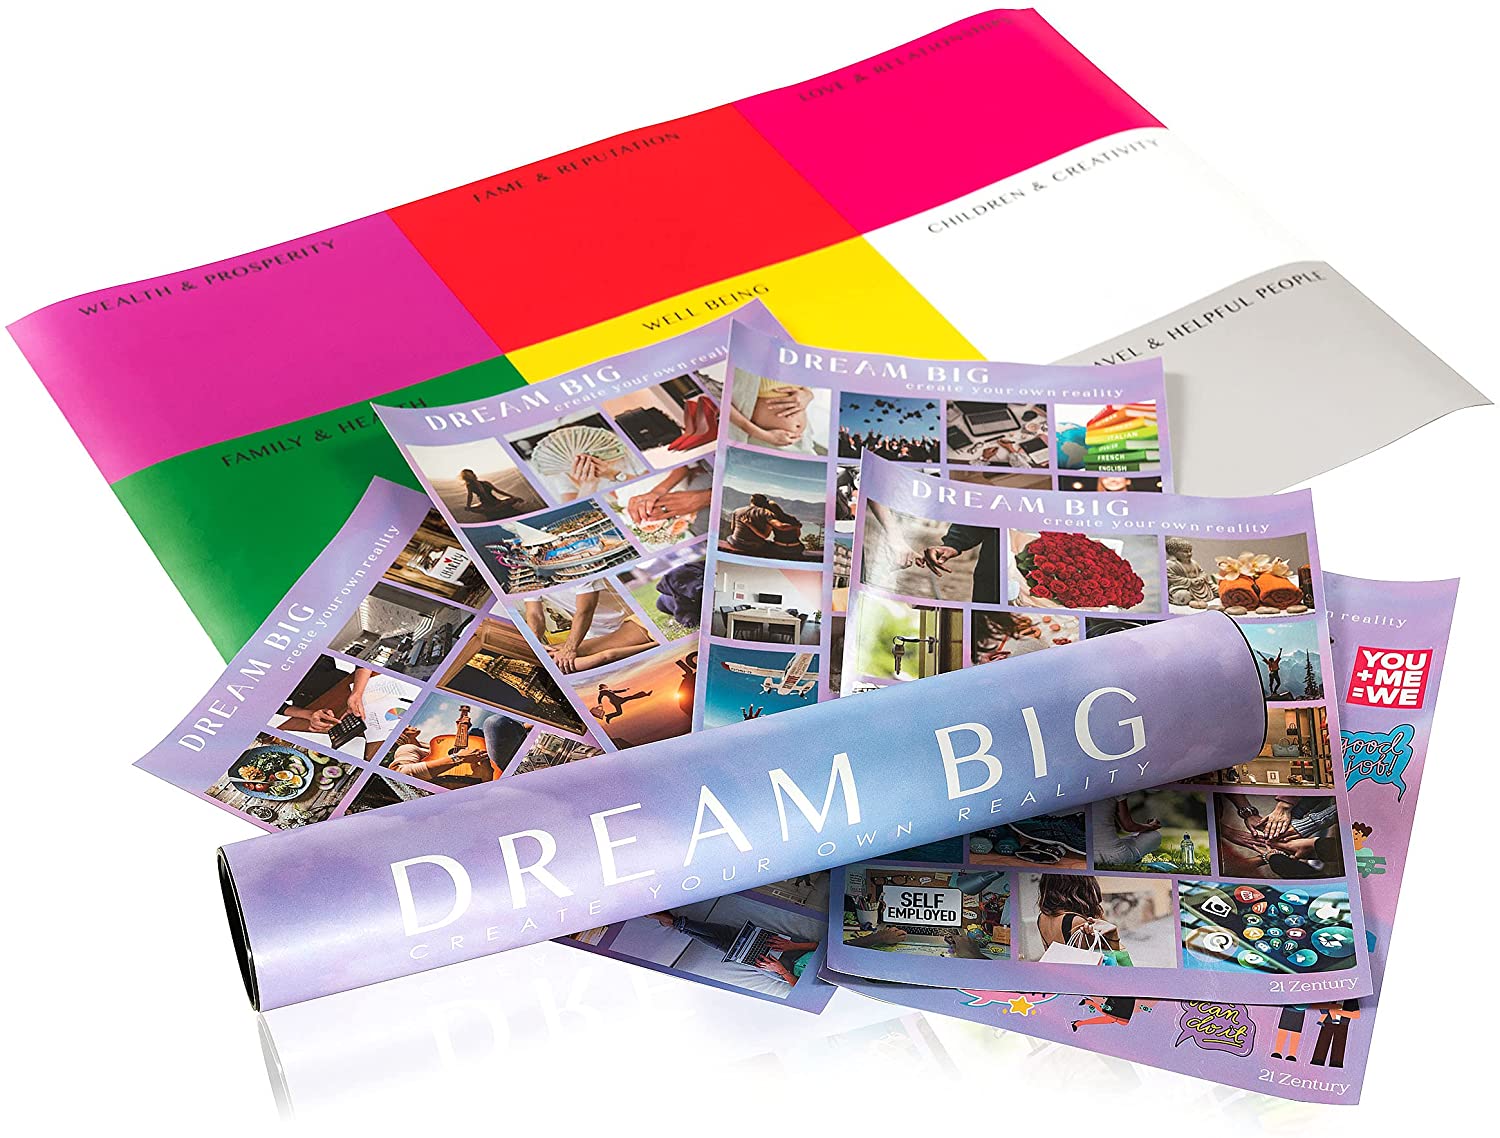 Magnificent 101 Vision Board Kit 